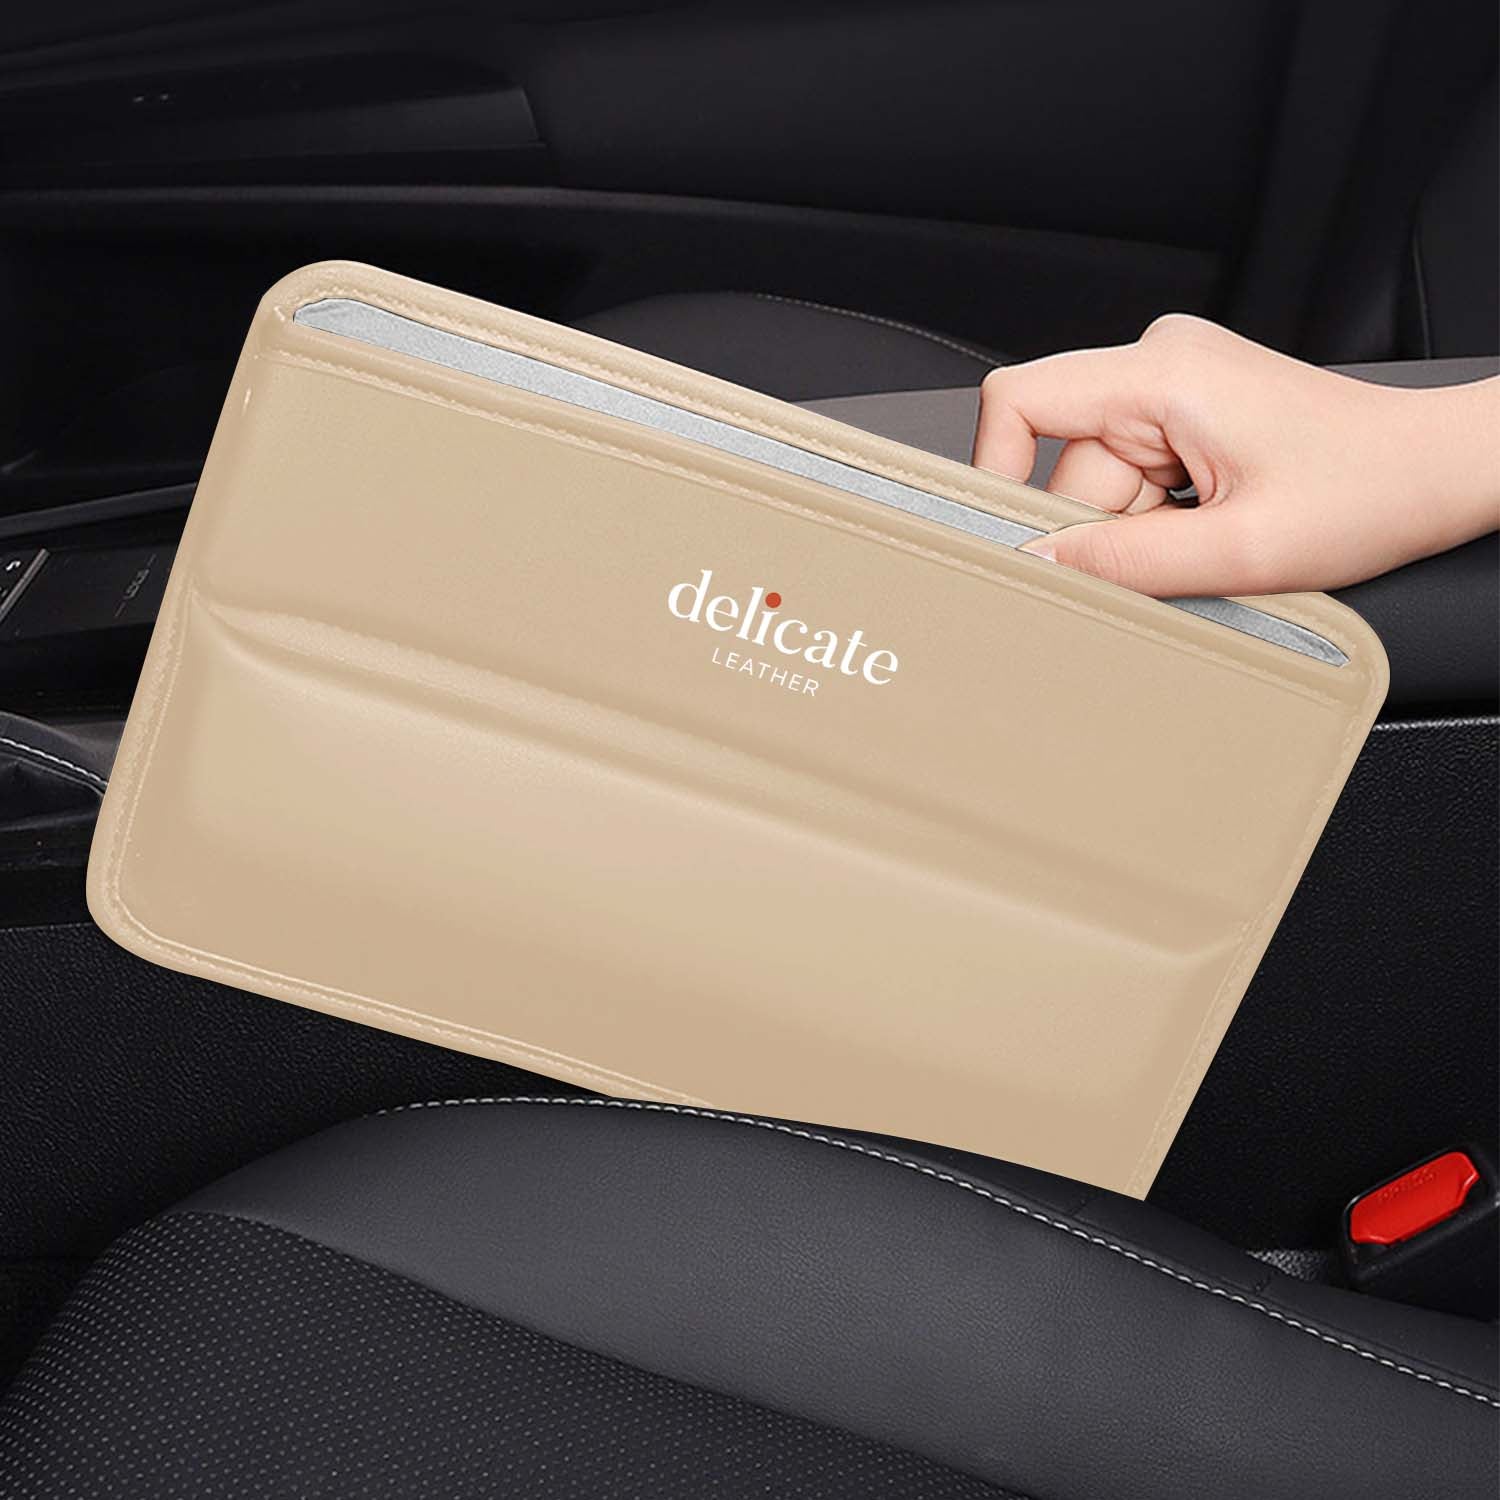 Car Seat Gap Filler Organizer, Custom Fit For Your Cars, Multifunctional PU Leather Console Side Pocket Organizer for Cellphones, Cards, Wallets, Keys